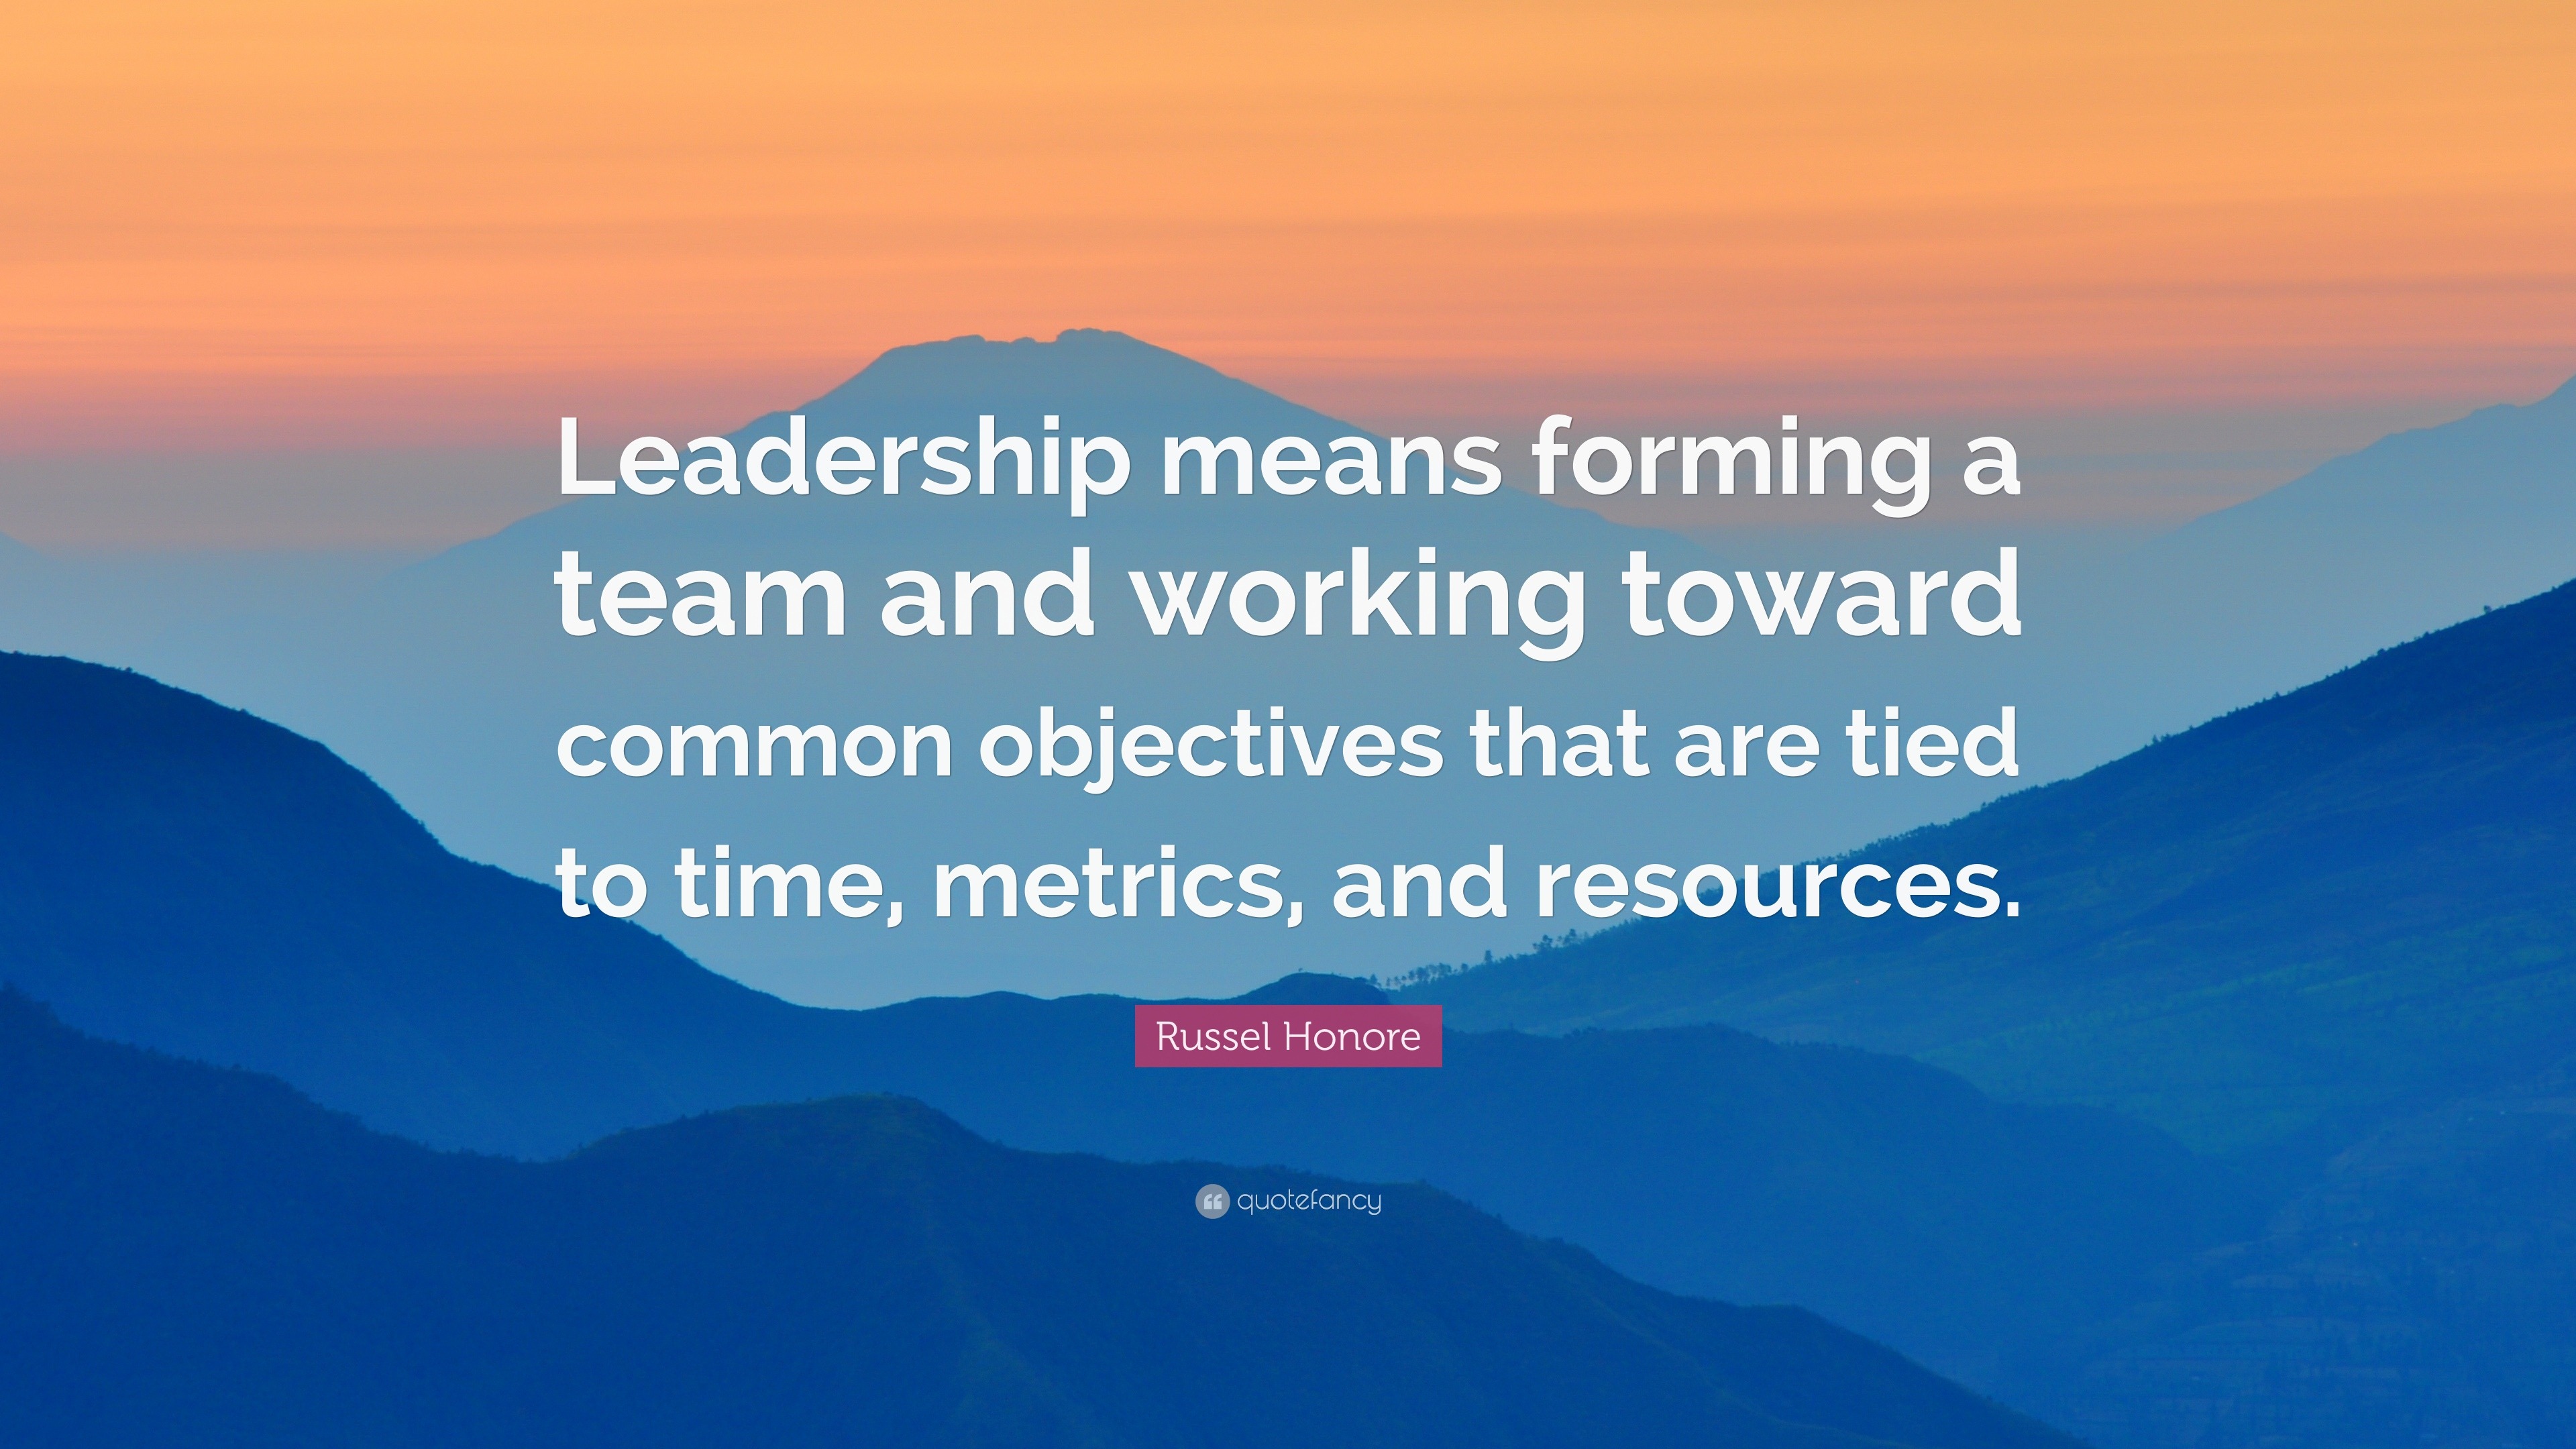 Russel Honore Quote: “Leadership means